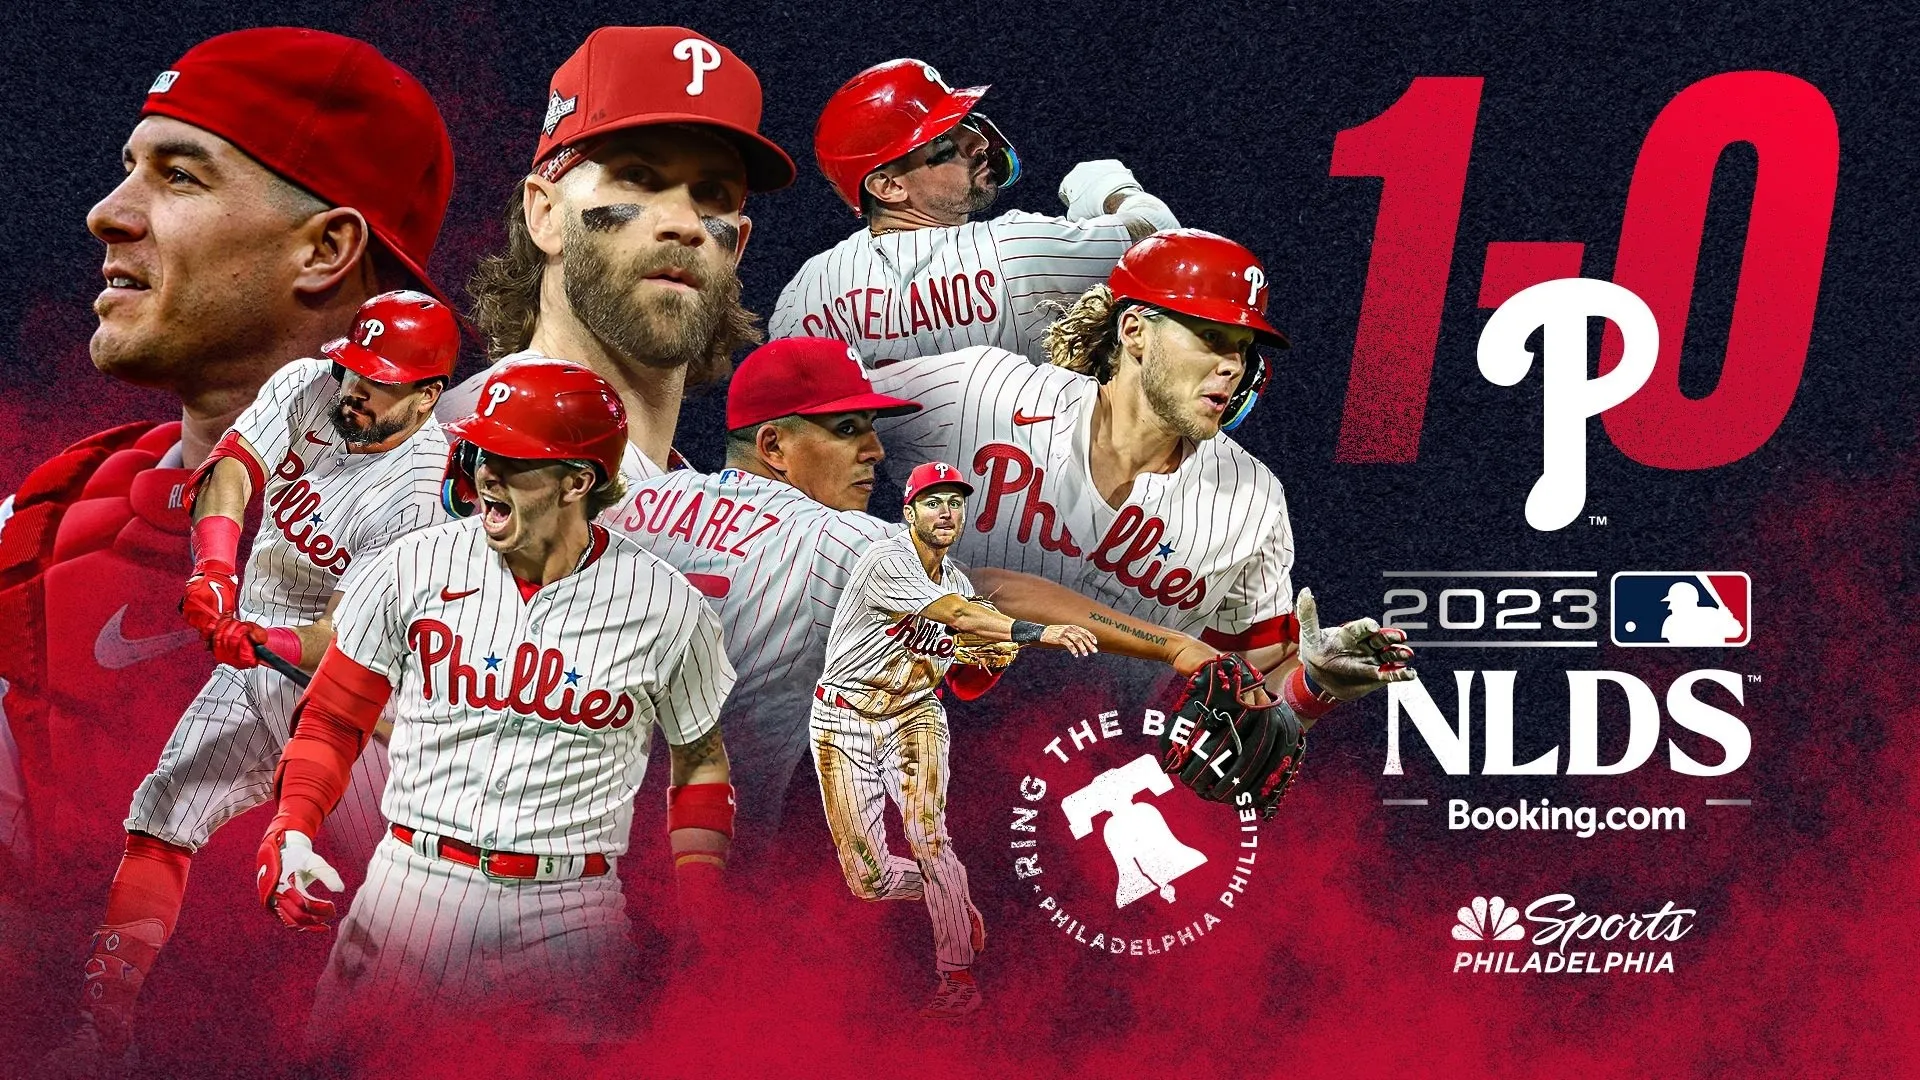 phillies red october poster